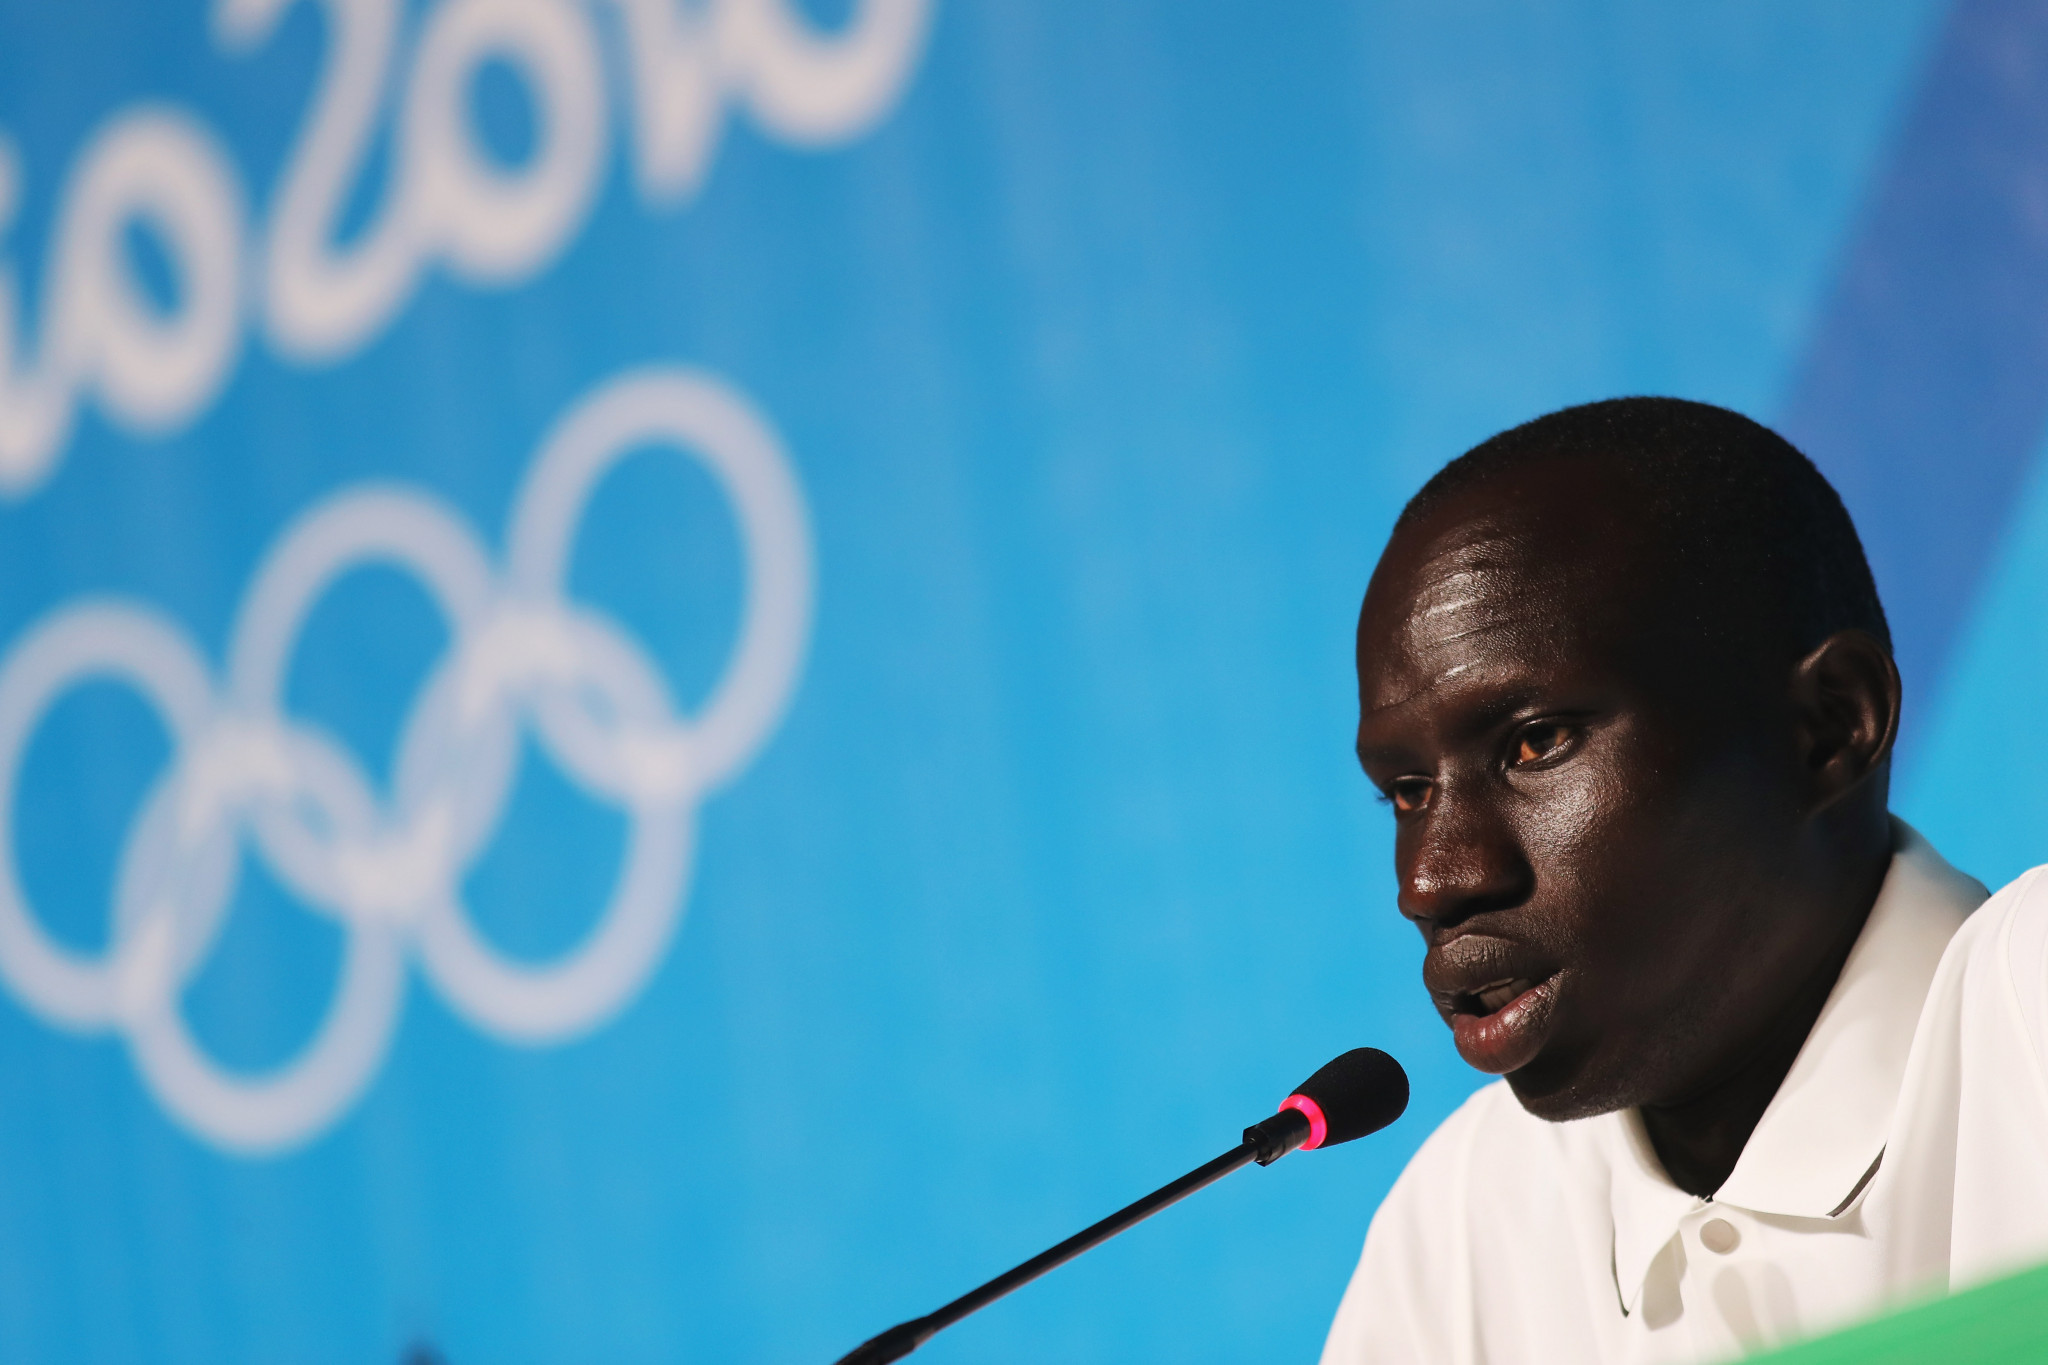 Yiech Pur Biel was one of 10 refugee athletes to compete at Rio 2016 ©Getty Images